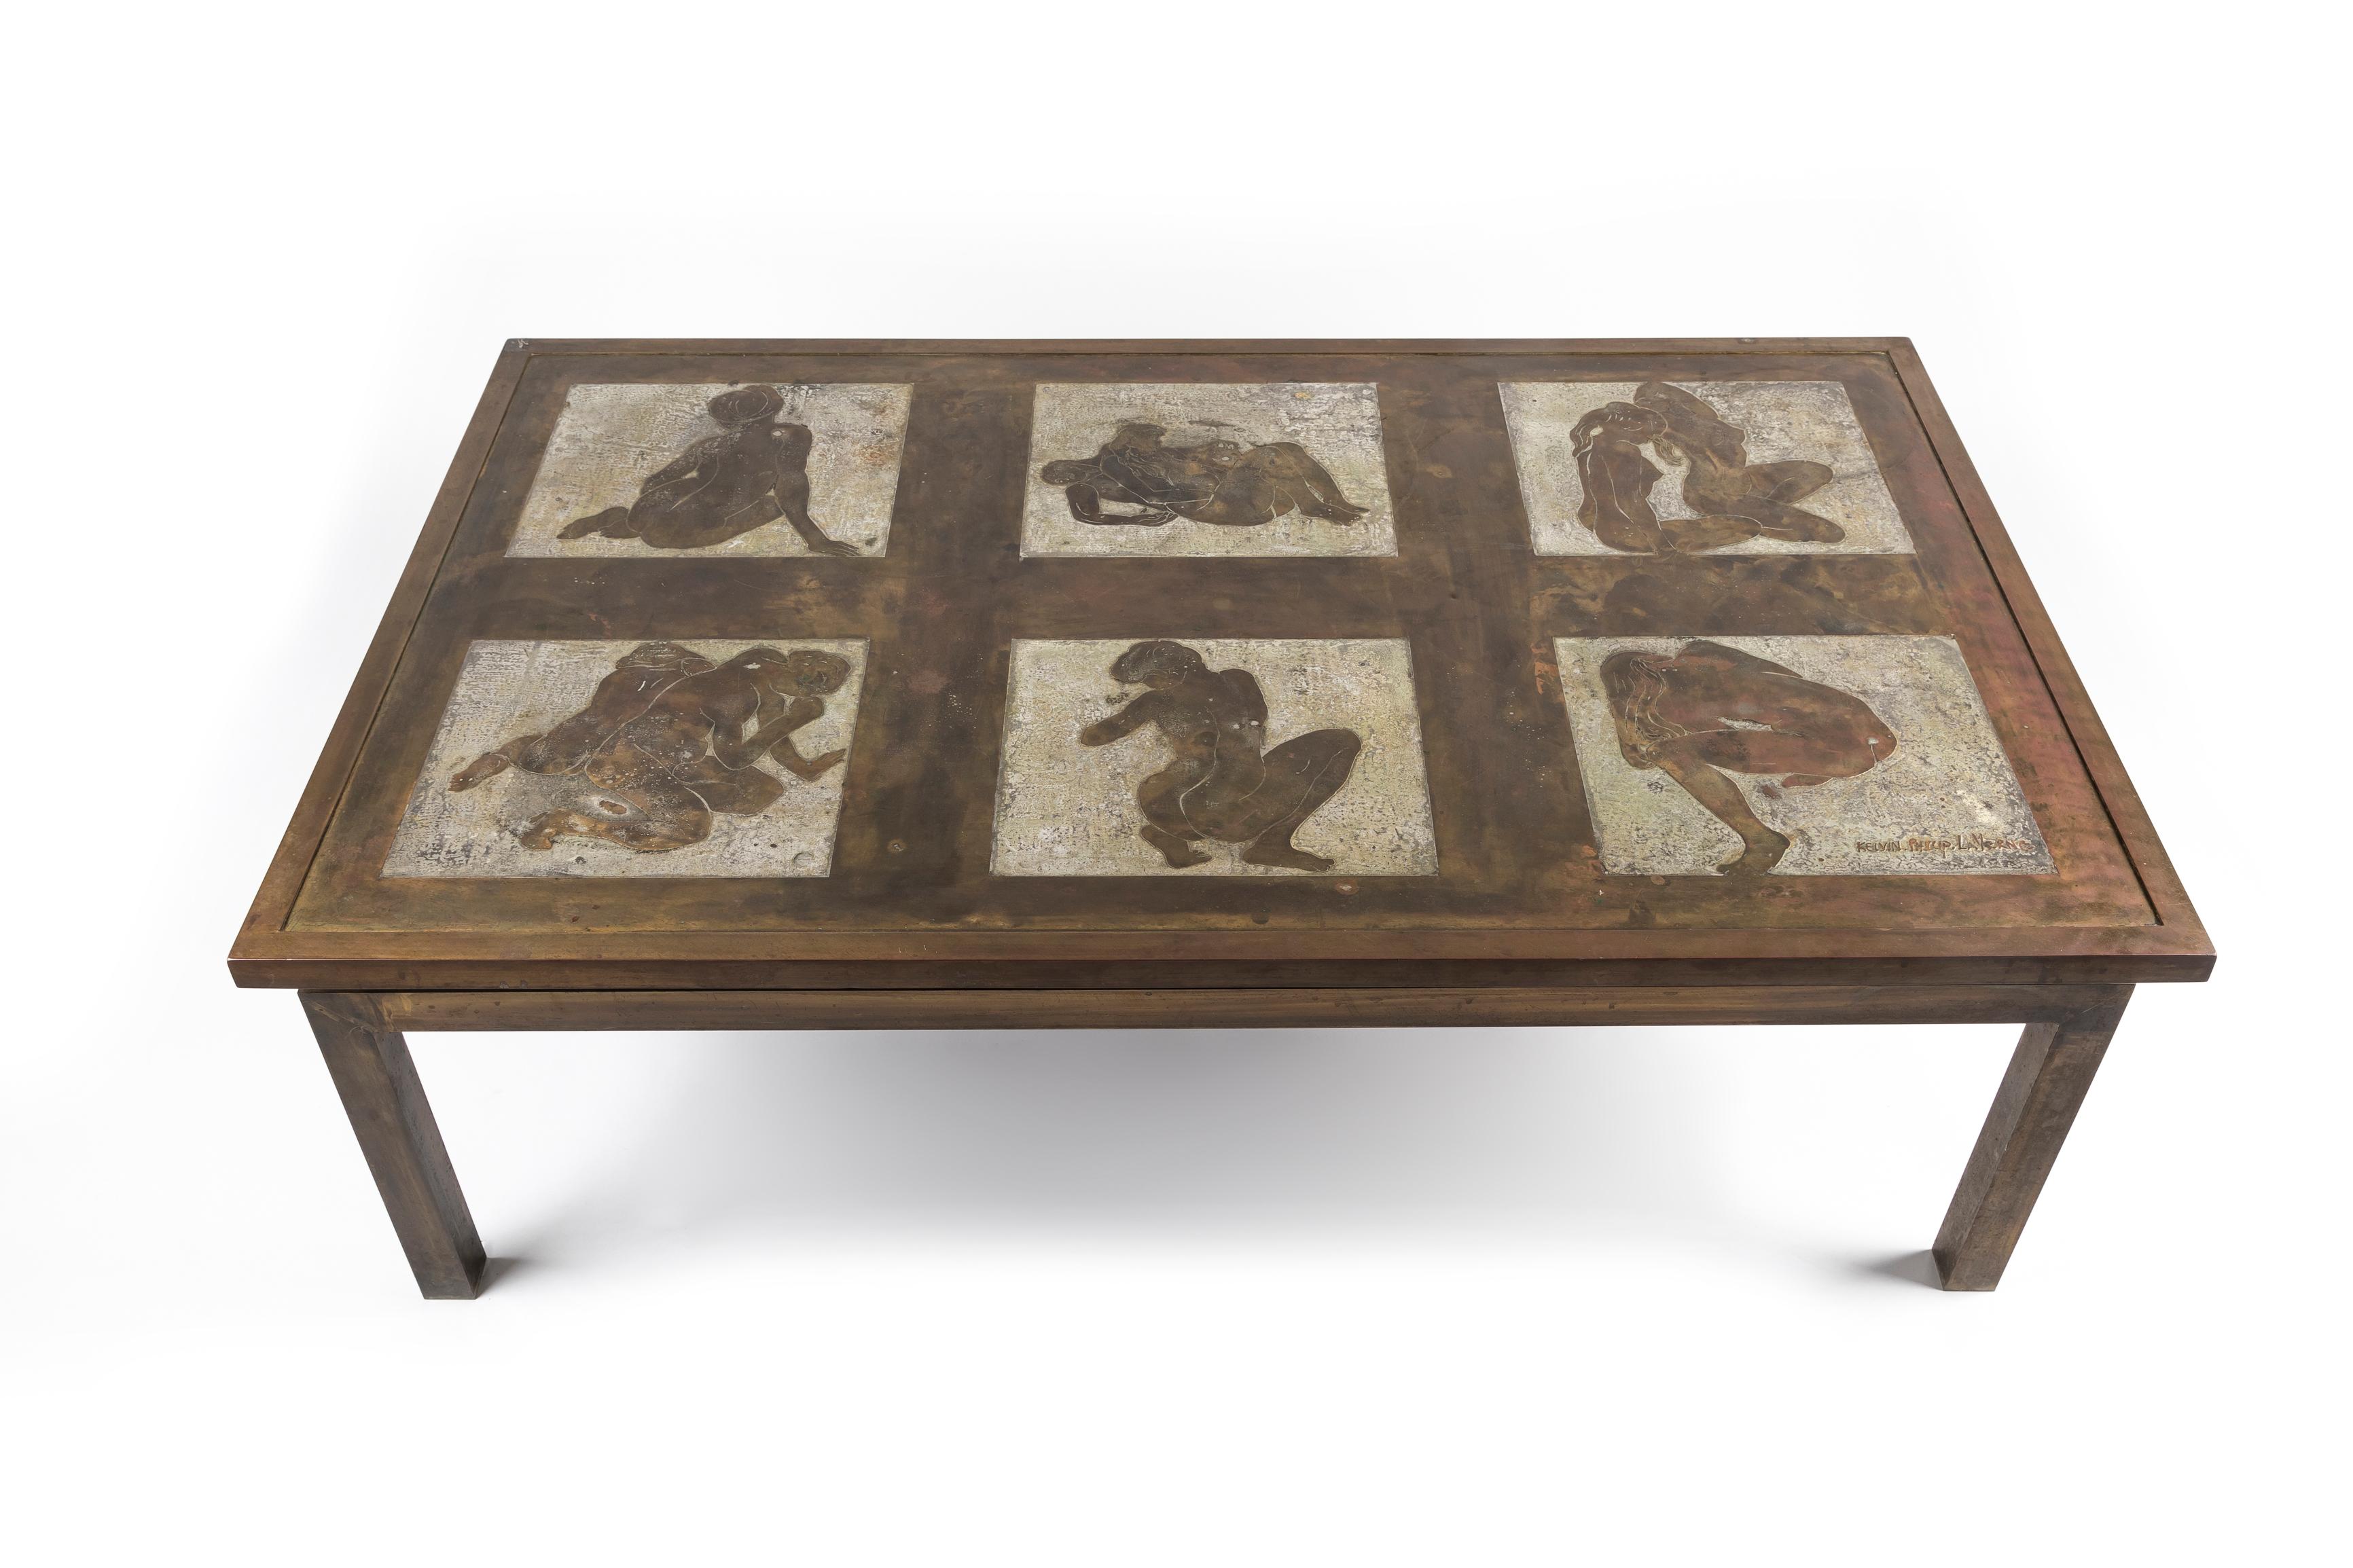 A Rare Philip & Kelvin LaVerne Erotica Coffee table of unusual design. This highly important and rare table depictis six scenes of nude females in patinated bronze and pewter by Philip & Kelvin LaVerne, American 1970's with acid etched signature